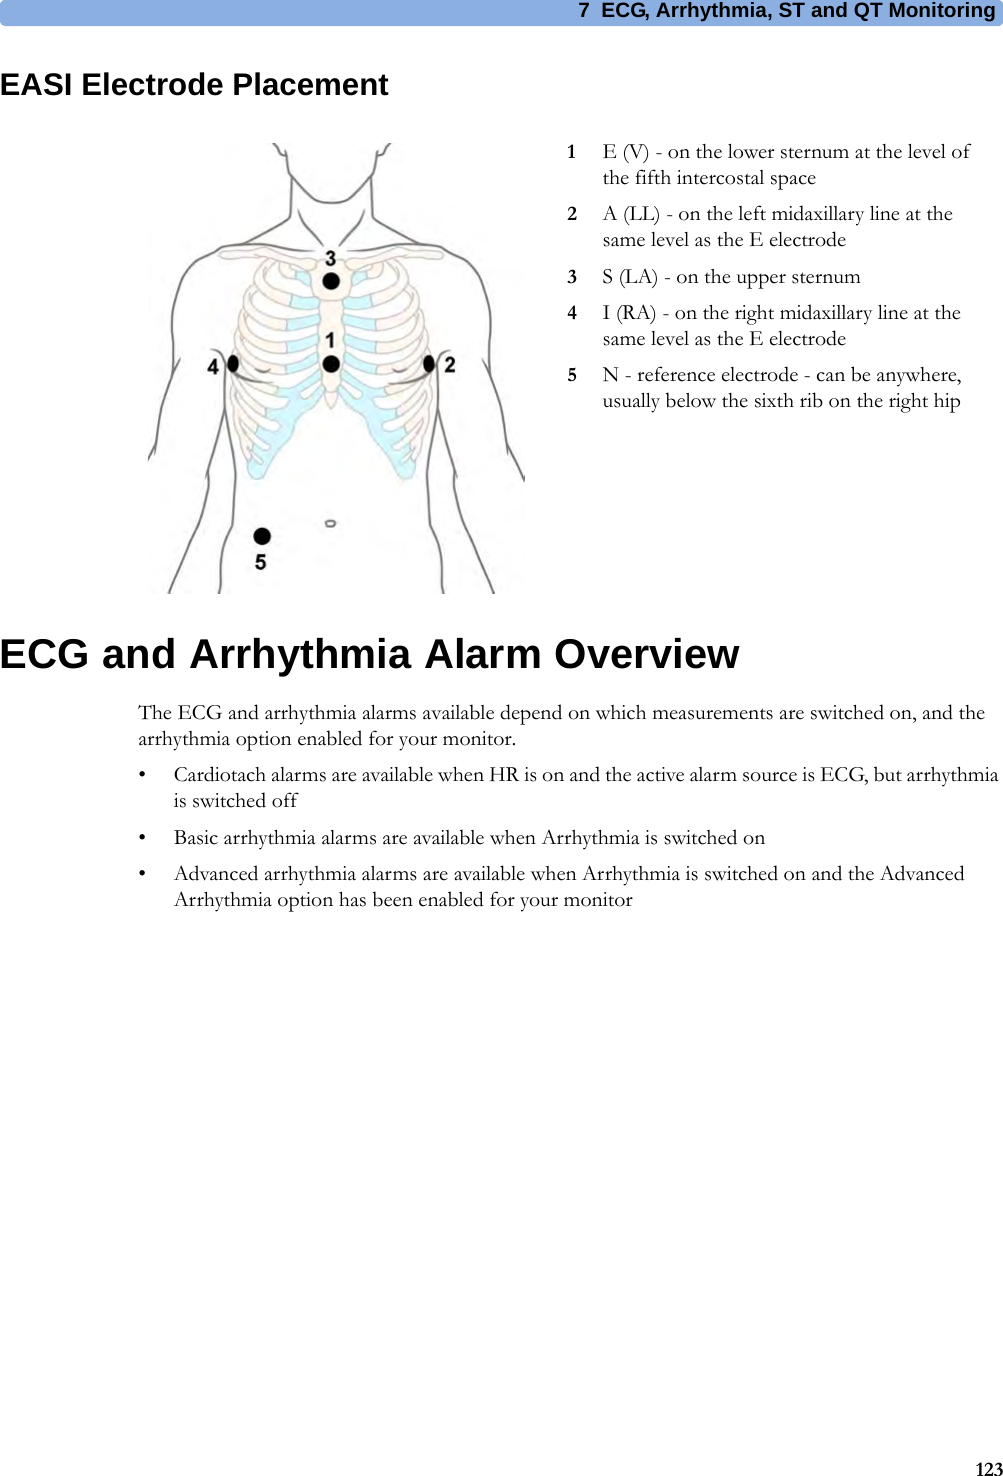 7 ECG, Arrhythmia, ST and QT Monitoring123EASI Electrode PlacementECG and Arrhythmia Alarm OverviewThe ECG and arrhythmia alarms available depend on which measurements are switched on, and the arrhythmia option enabled for your monitor.• Cardiotach alarms are available when HR is on and the active alarm source is ECG, but arrhythmia is switched off• Basic arrhythmia alarms are available when Arrhythmia is switched on• Advanced arrhythmia alarms are available when Arrhythmia is switched on and the Advanced Arrhythmia option has been enabled for your monitor1E (V) - on the lower sternum at the level of the fifth intercostal space2A (LL) - on the left midaxillary line at the same level as the E electrode3S (LA) - on the upper sternum4I (RA) - on the right midaxillary line at the same level as the E electrode5N - reference electrode - can be anywhere, usually below the sixth rib on the right hip